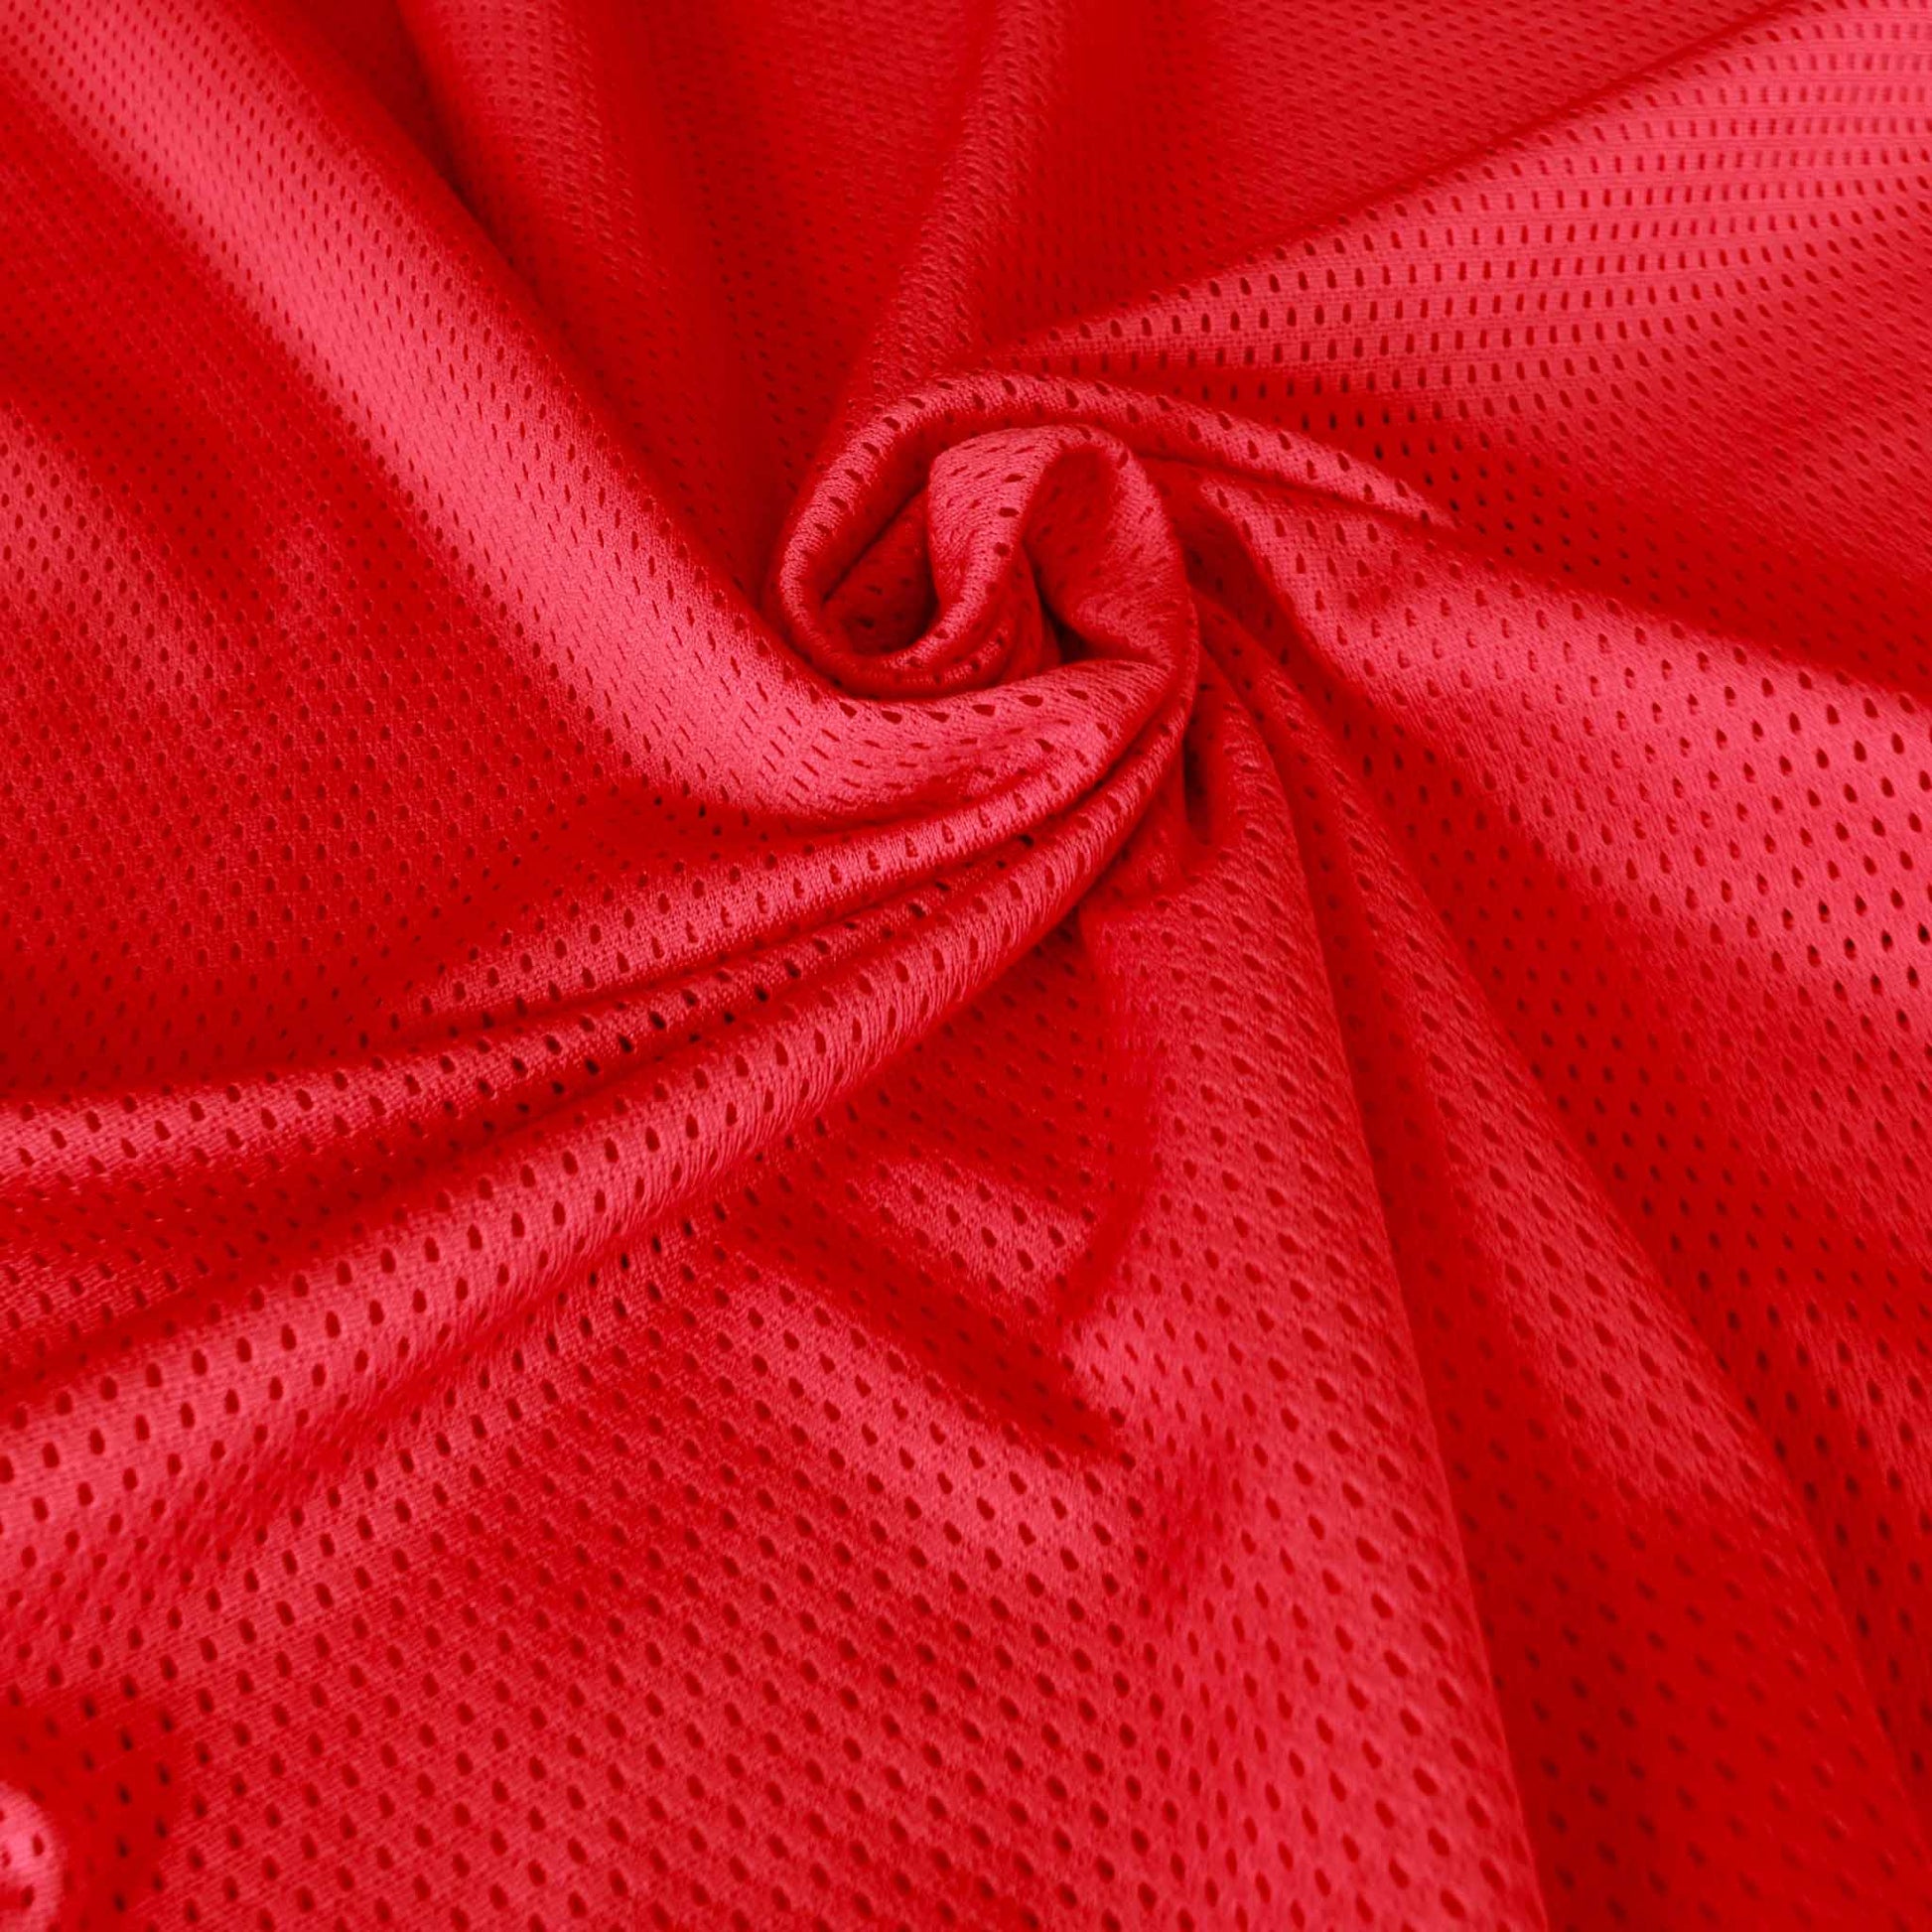 red airtext jersey fabric for sports dressmaking